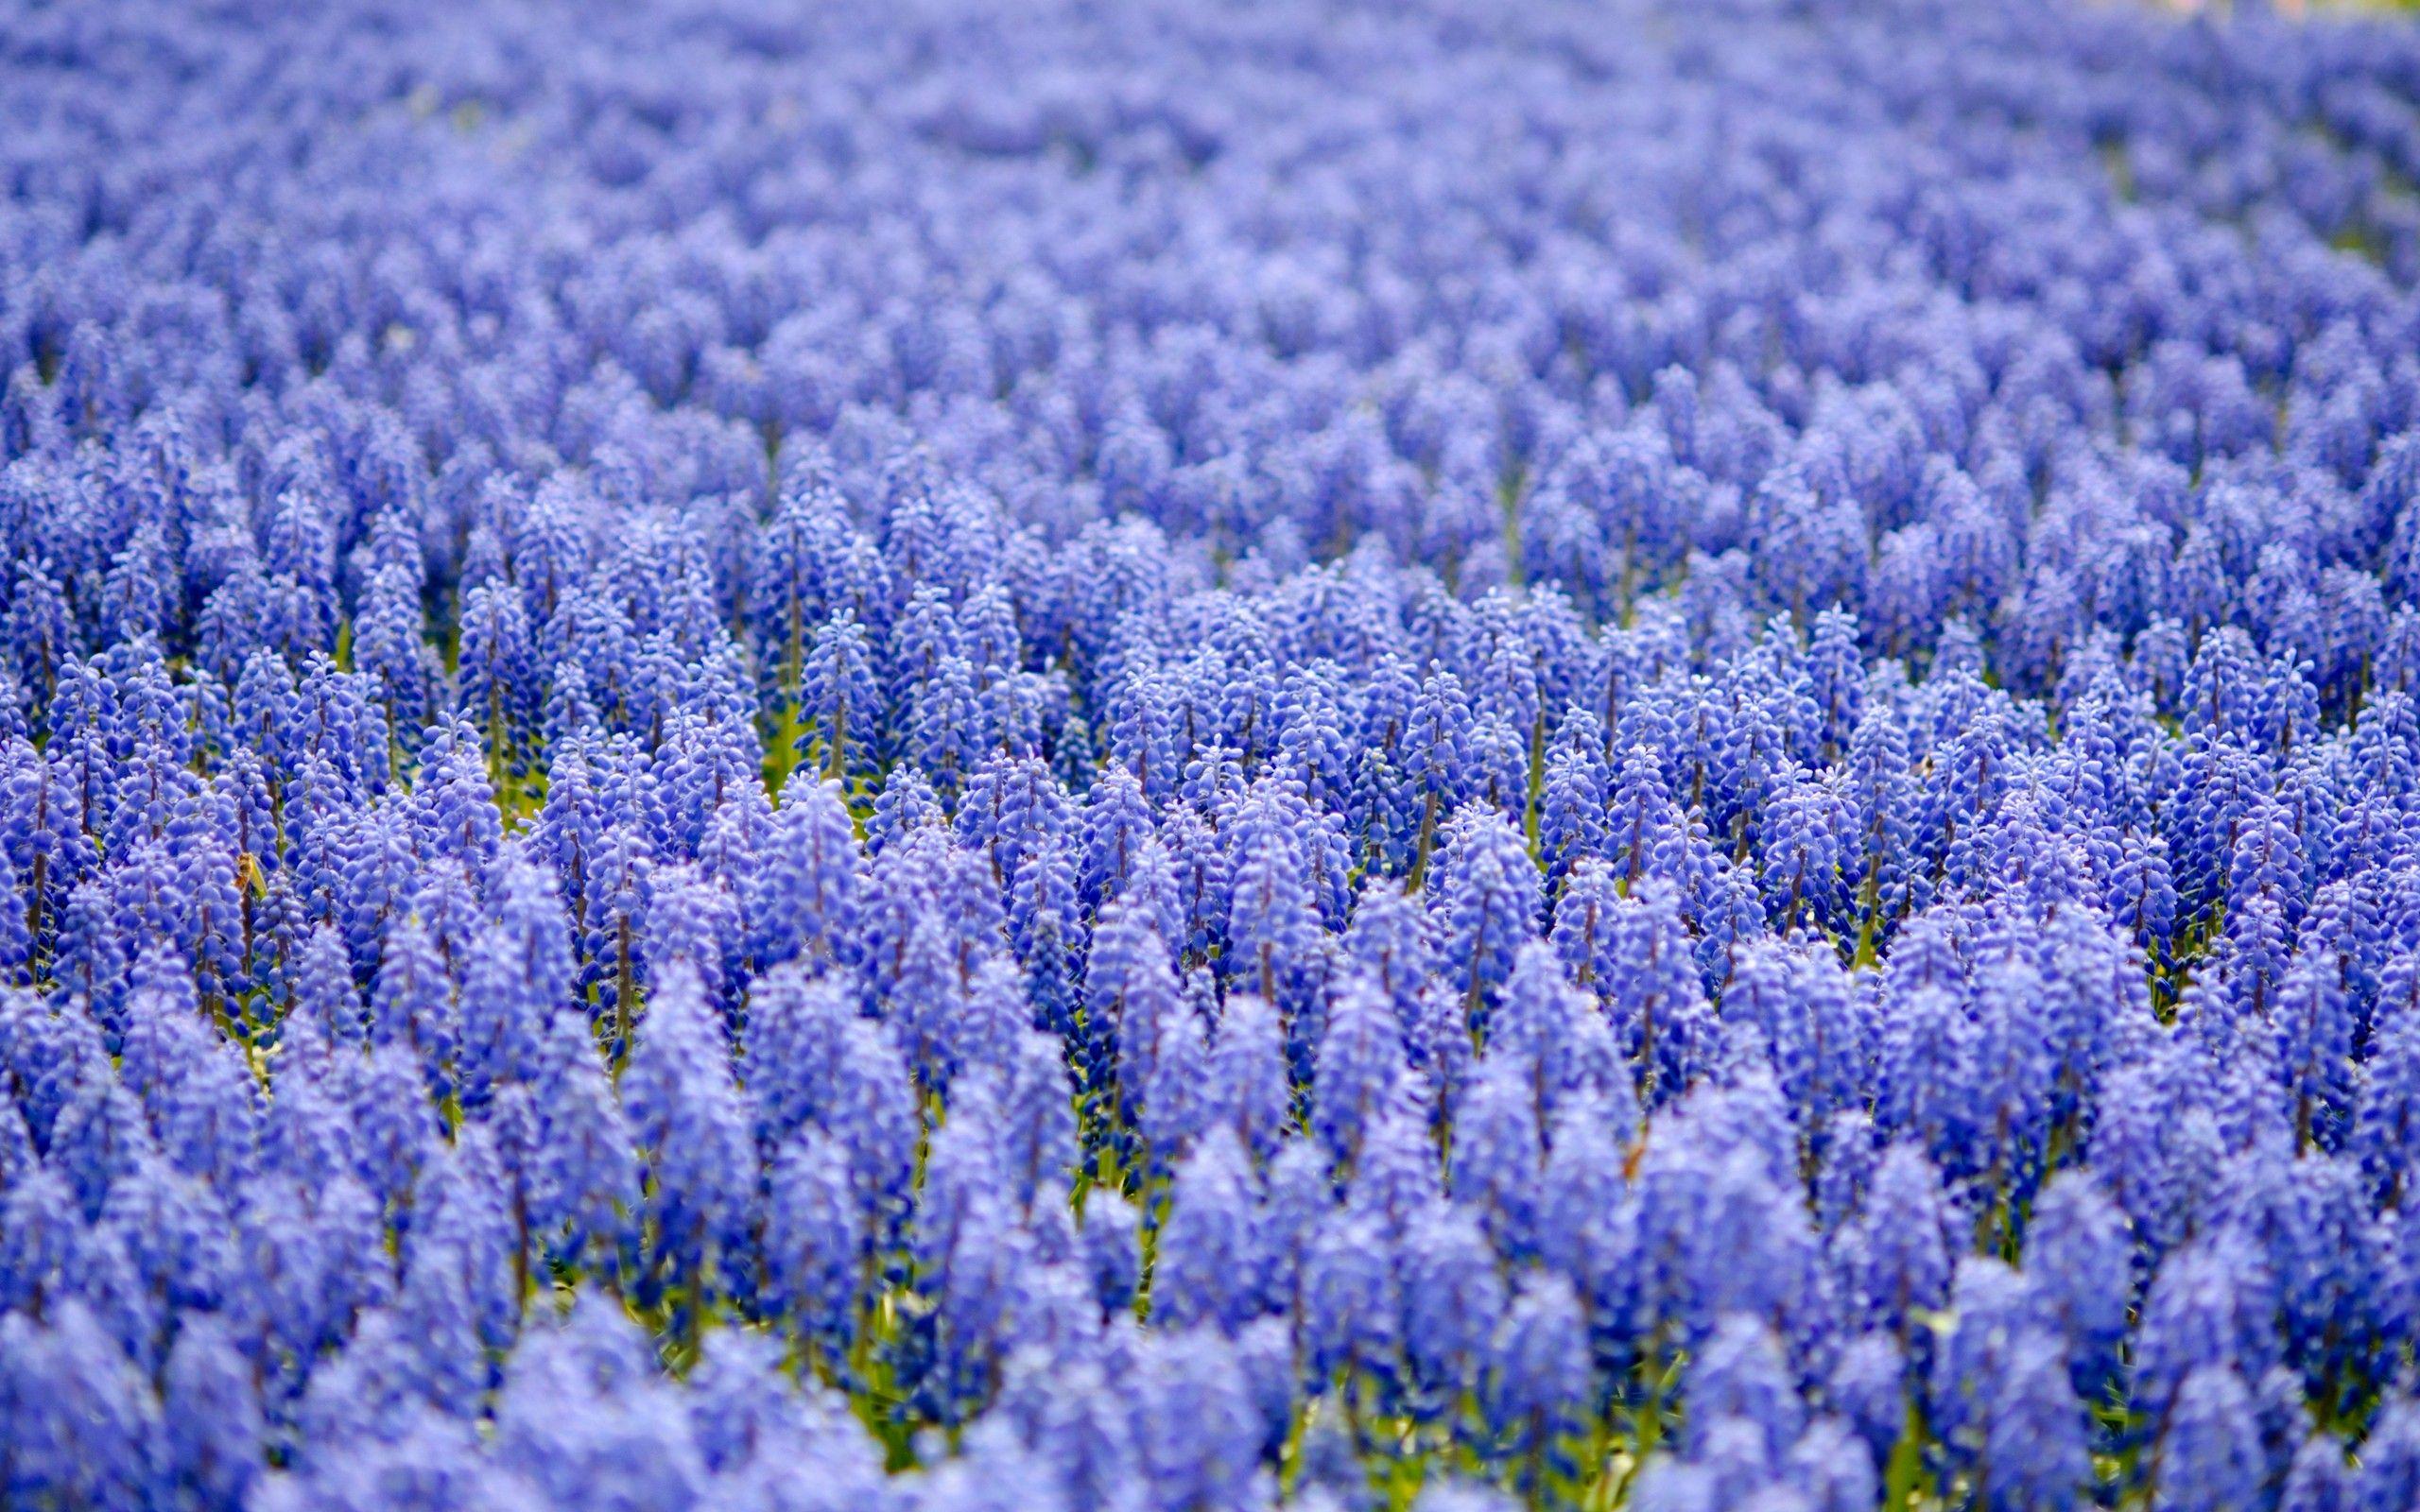 Blue Flowers Wallpaper High Quality. Download Free. Beautiful